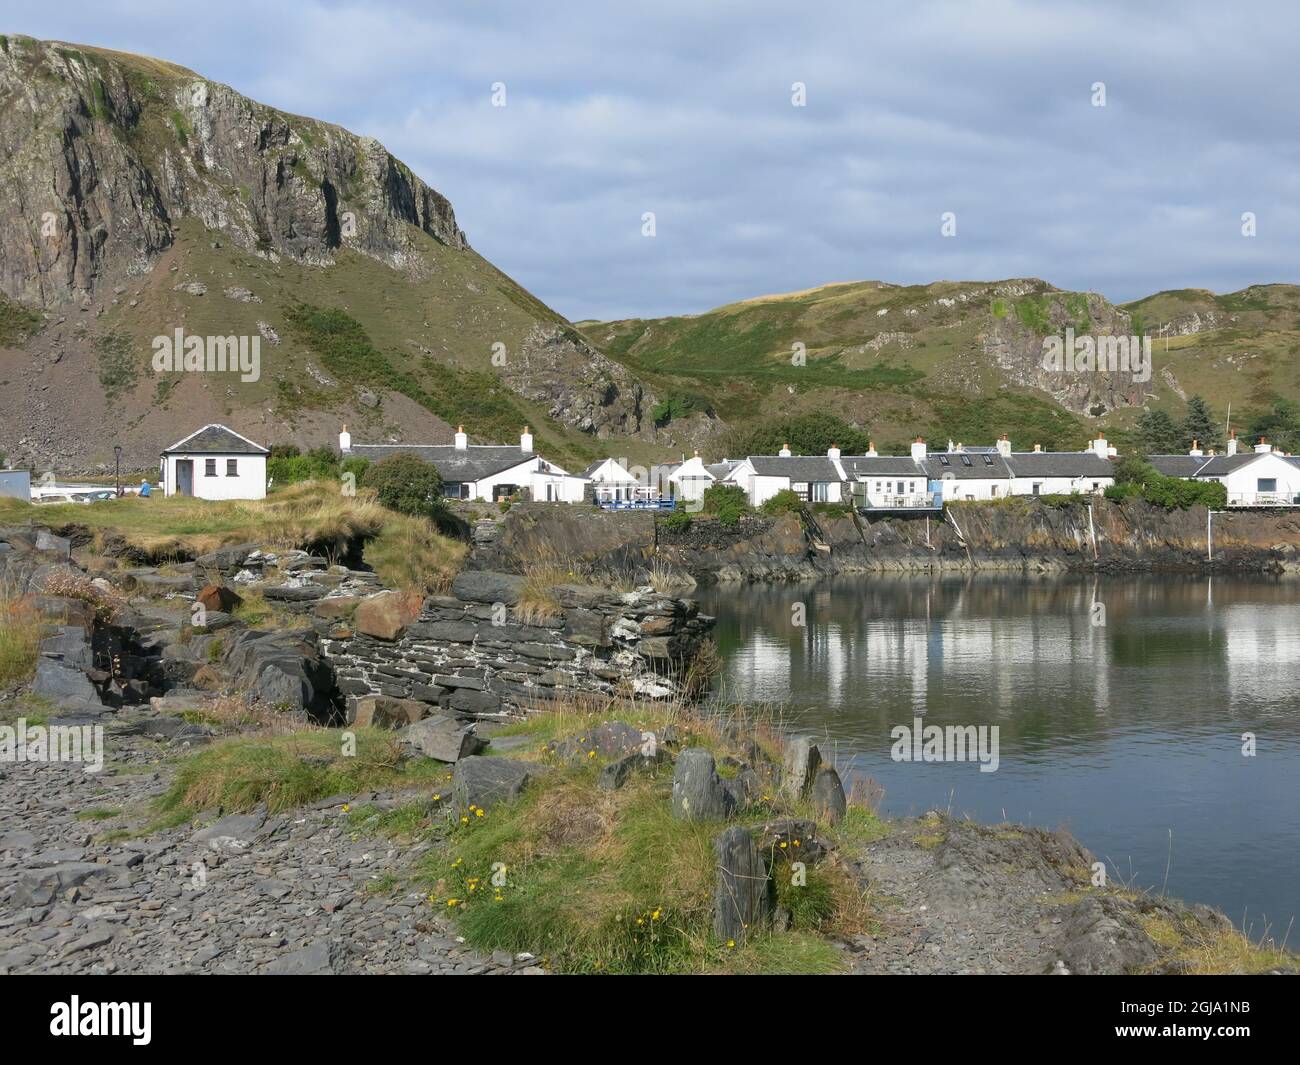 The picturesque village of Ellenabeich with traditional white-washed cottages set against a craggy mountain backdrop; summer 2021, the Inner Hebrides. Stock Photo